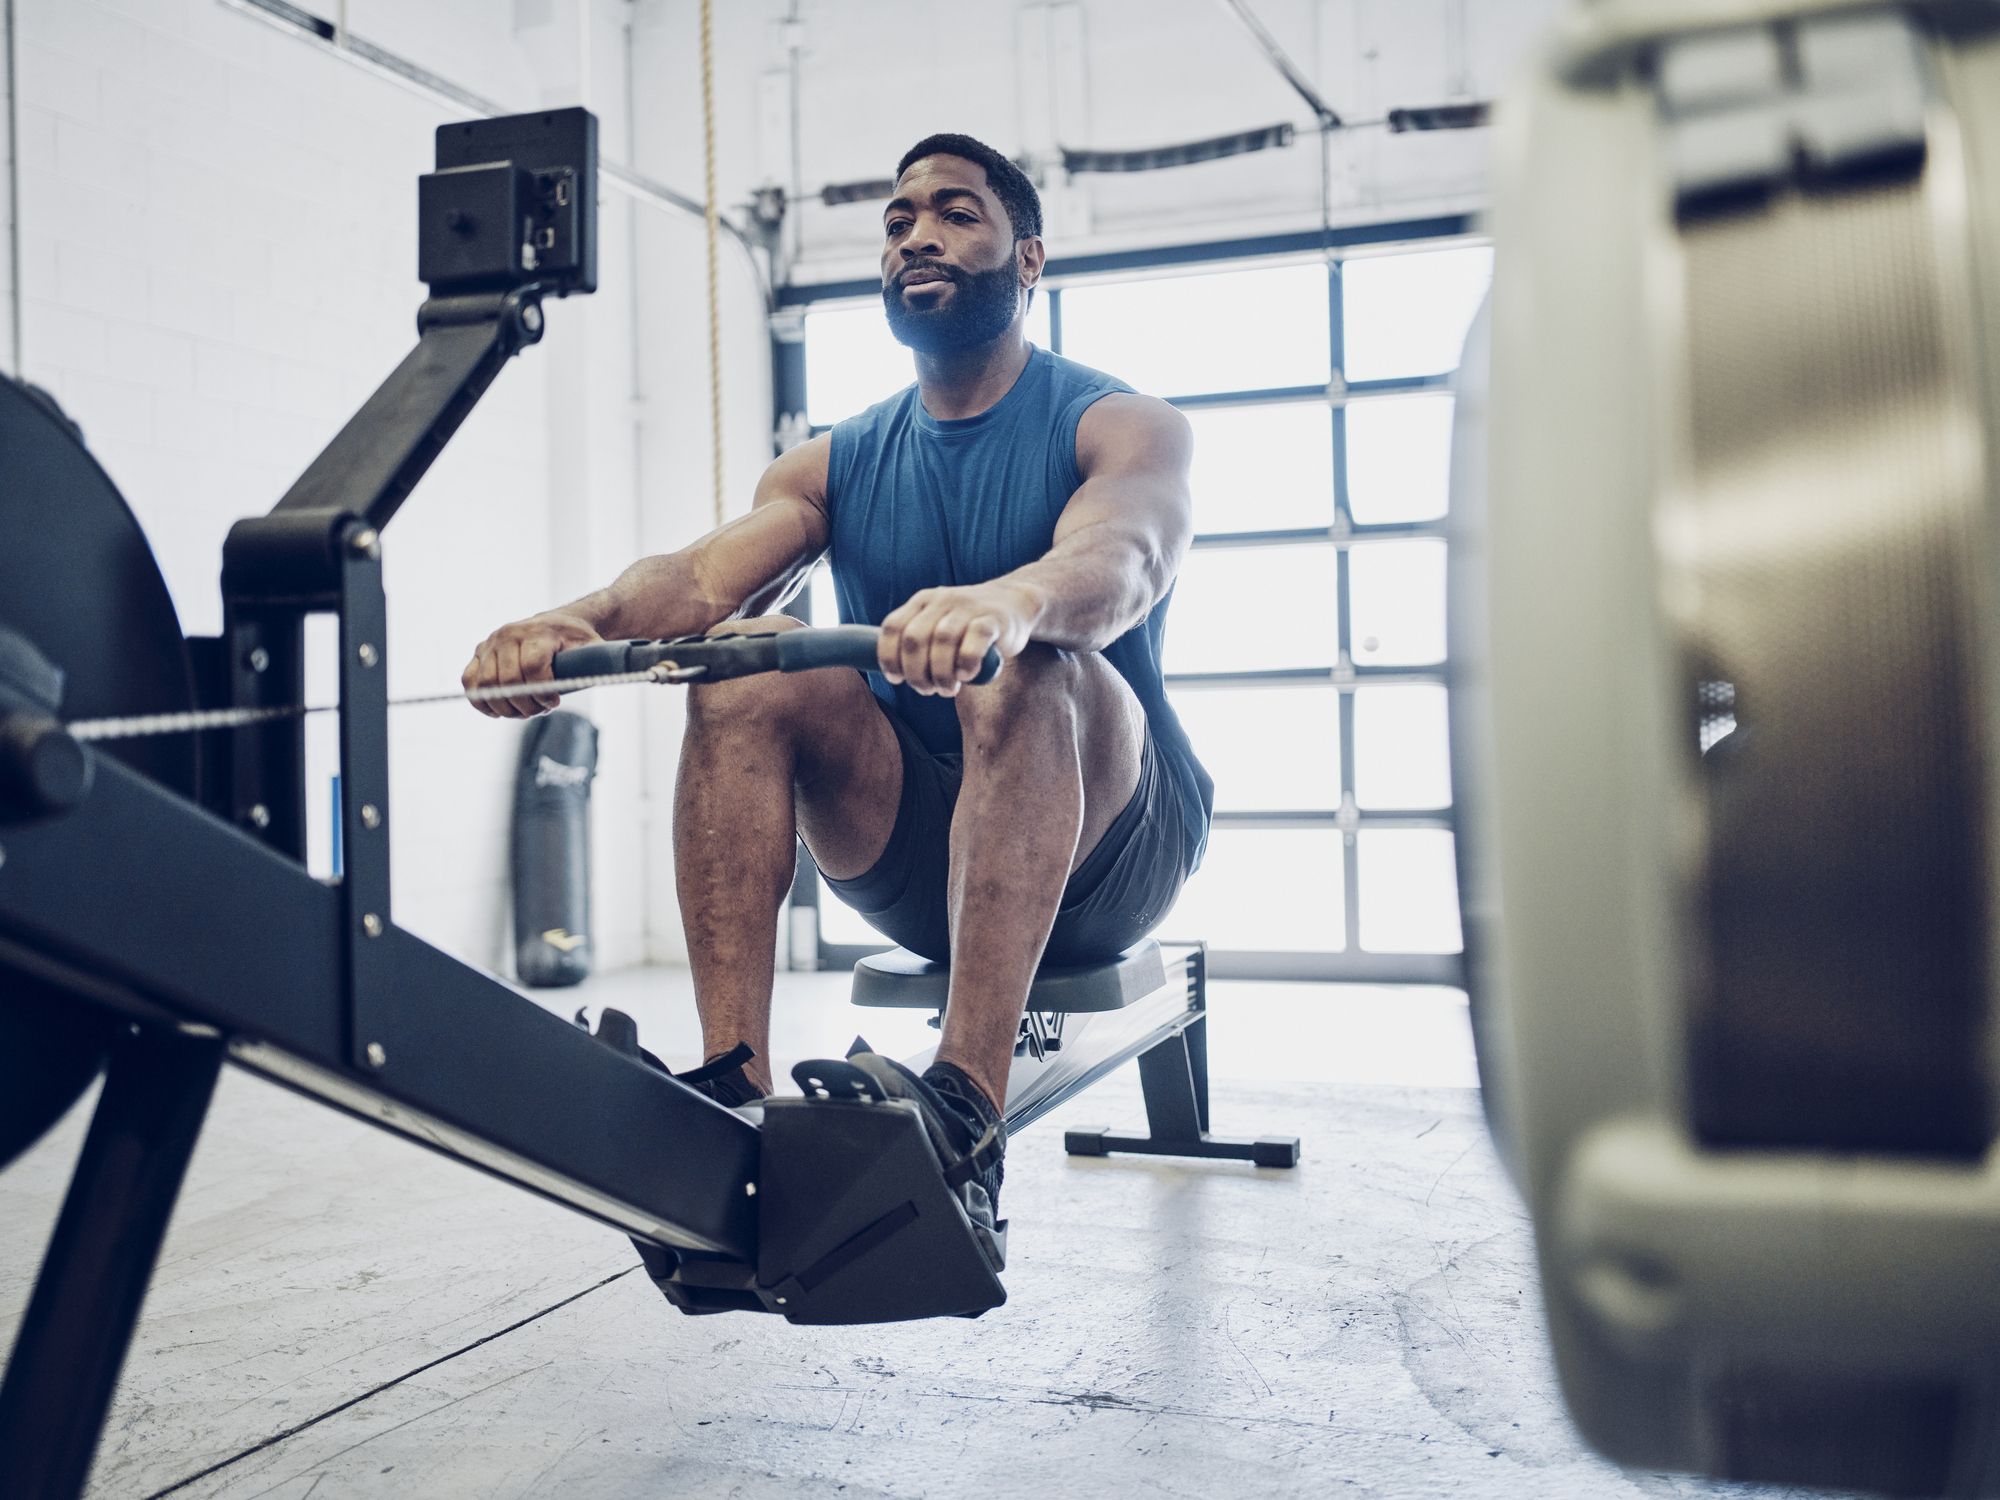 Get the Most Out of Your Rowing Machine Workout